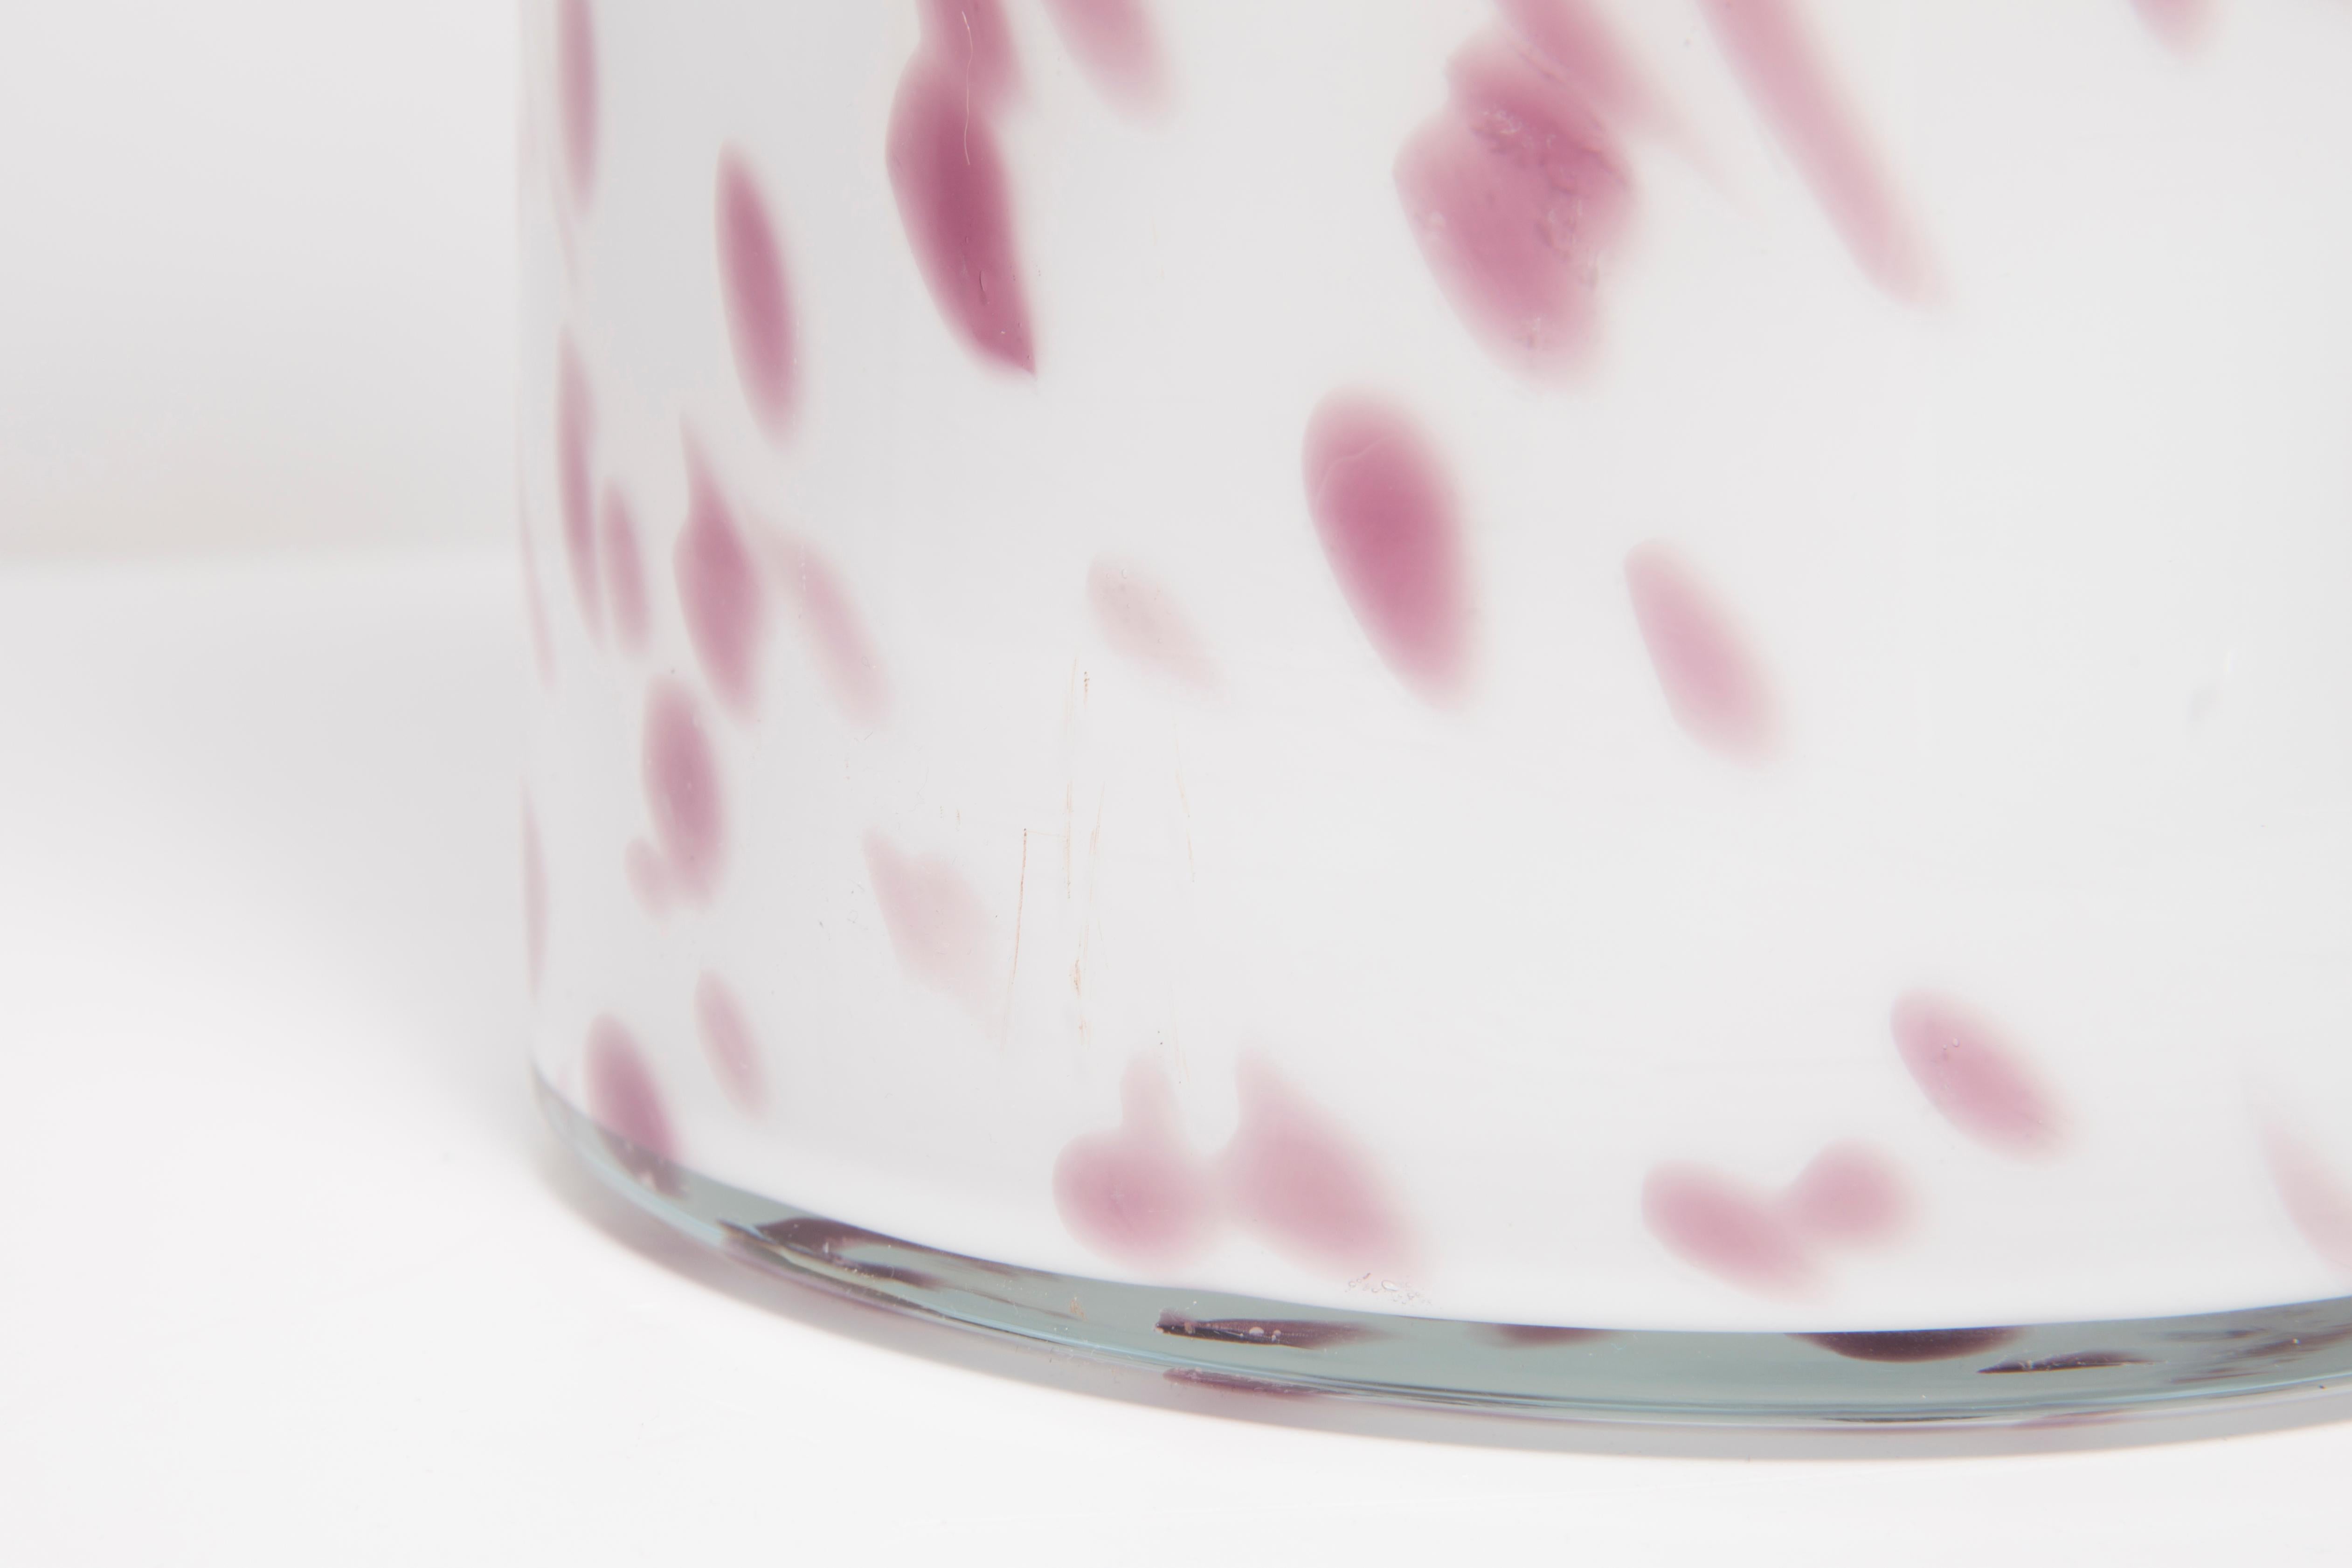 Mid Century Vintage Dalmatian White and Violet Murano Glass Vase, Italy, 2000s For Sale 2